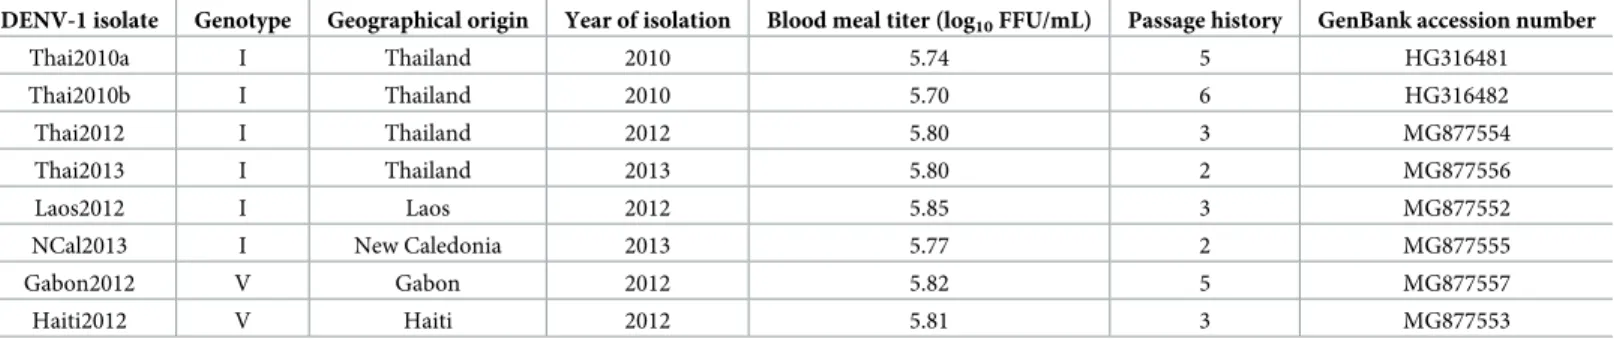 Table 1. Description of DENV type 1 isolates used in this study. The blood meal titer refers to the concentration of infectious viral particles (expressed in log 10 -trans- -trans-formed focus-forming units per mL) measured in the artificial blood meal off